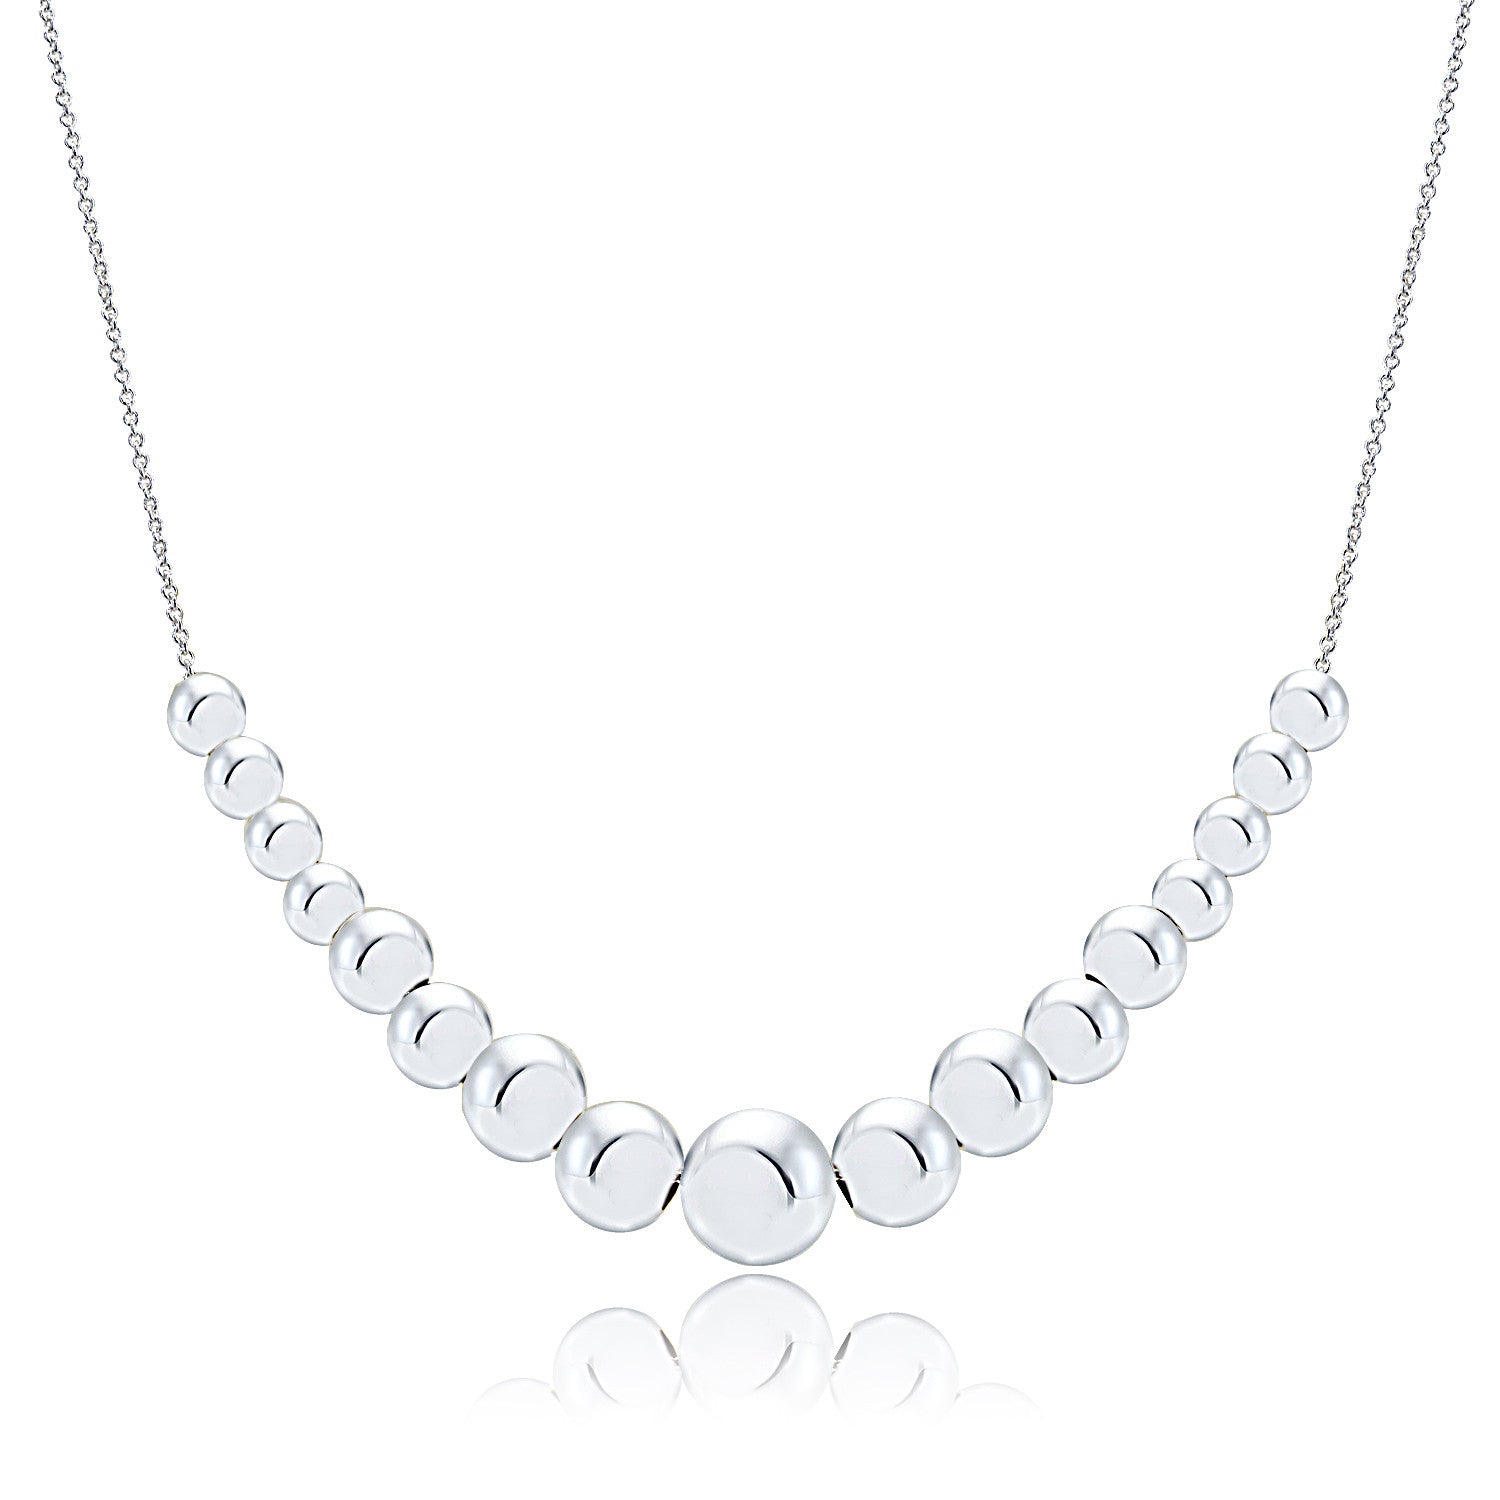 Beaded Sterling Silver Necklace - Silver